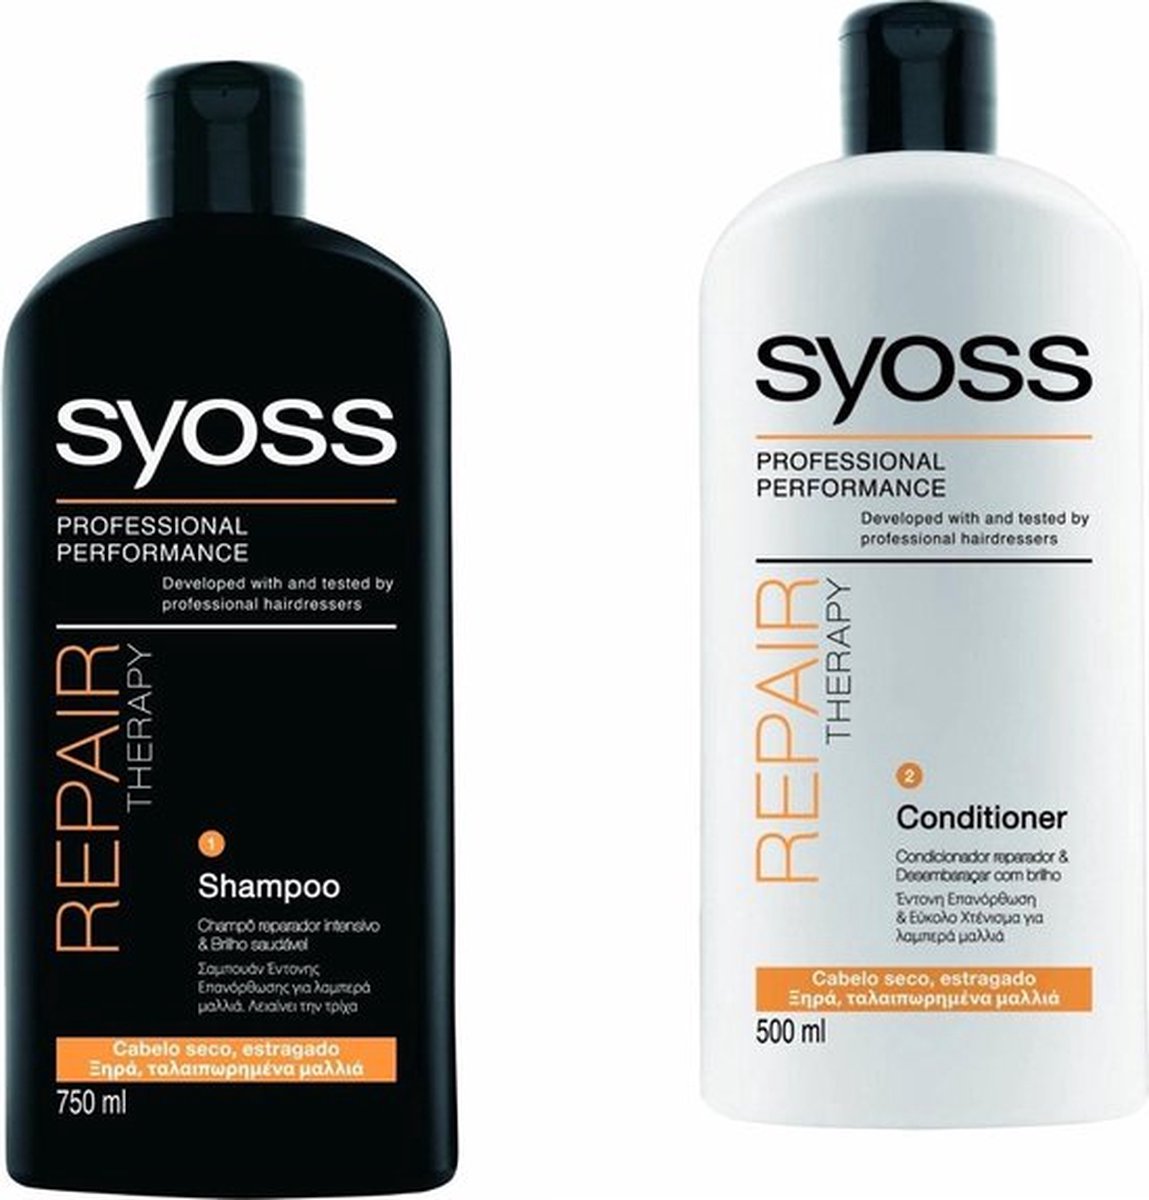 Syoss Repair Therapy Shampoo en Conditioner 2 x 500 ml